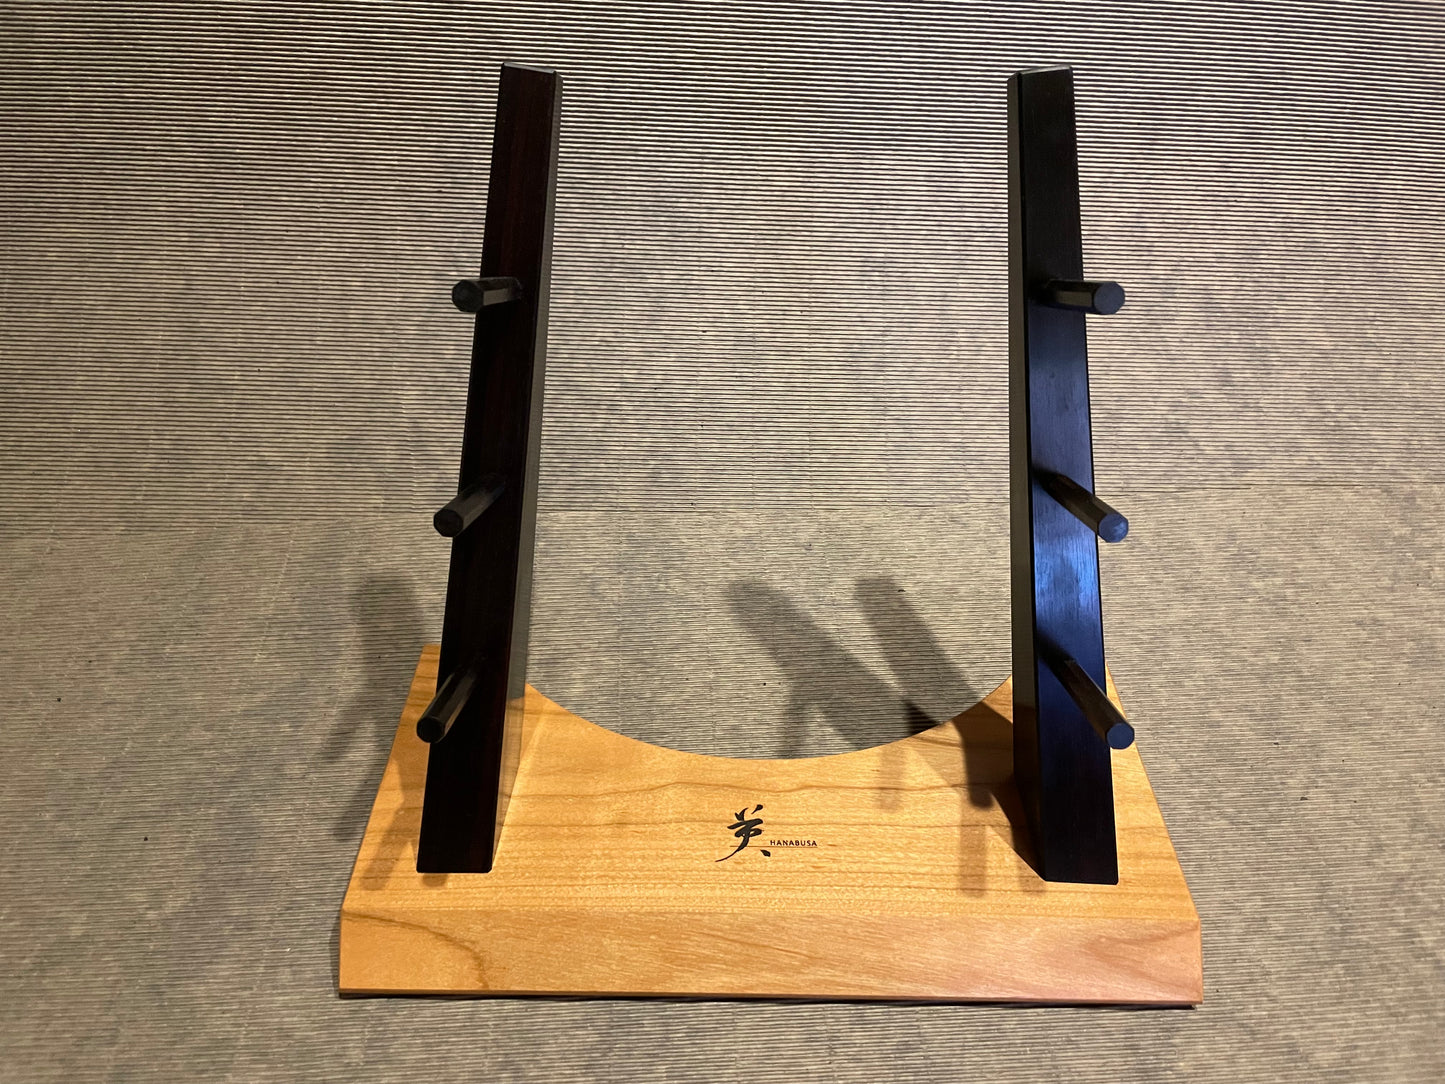 HANABUSA Special Knife stand.